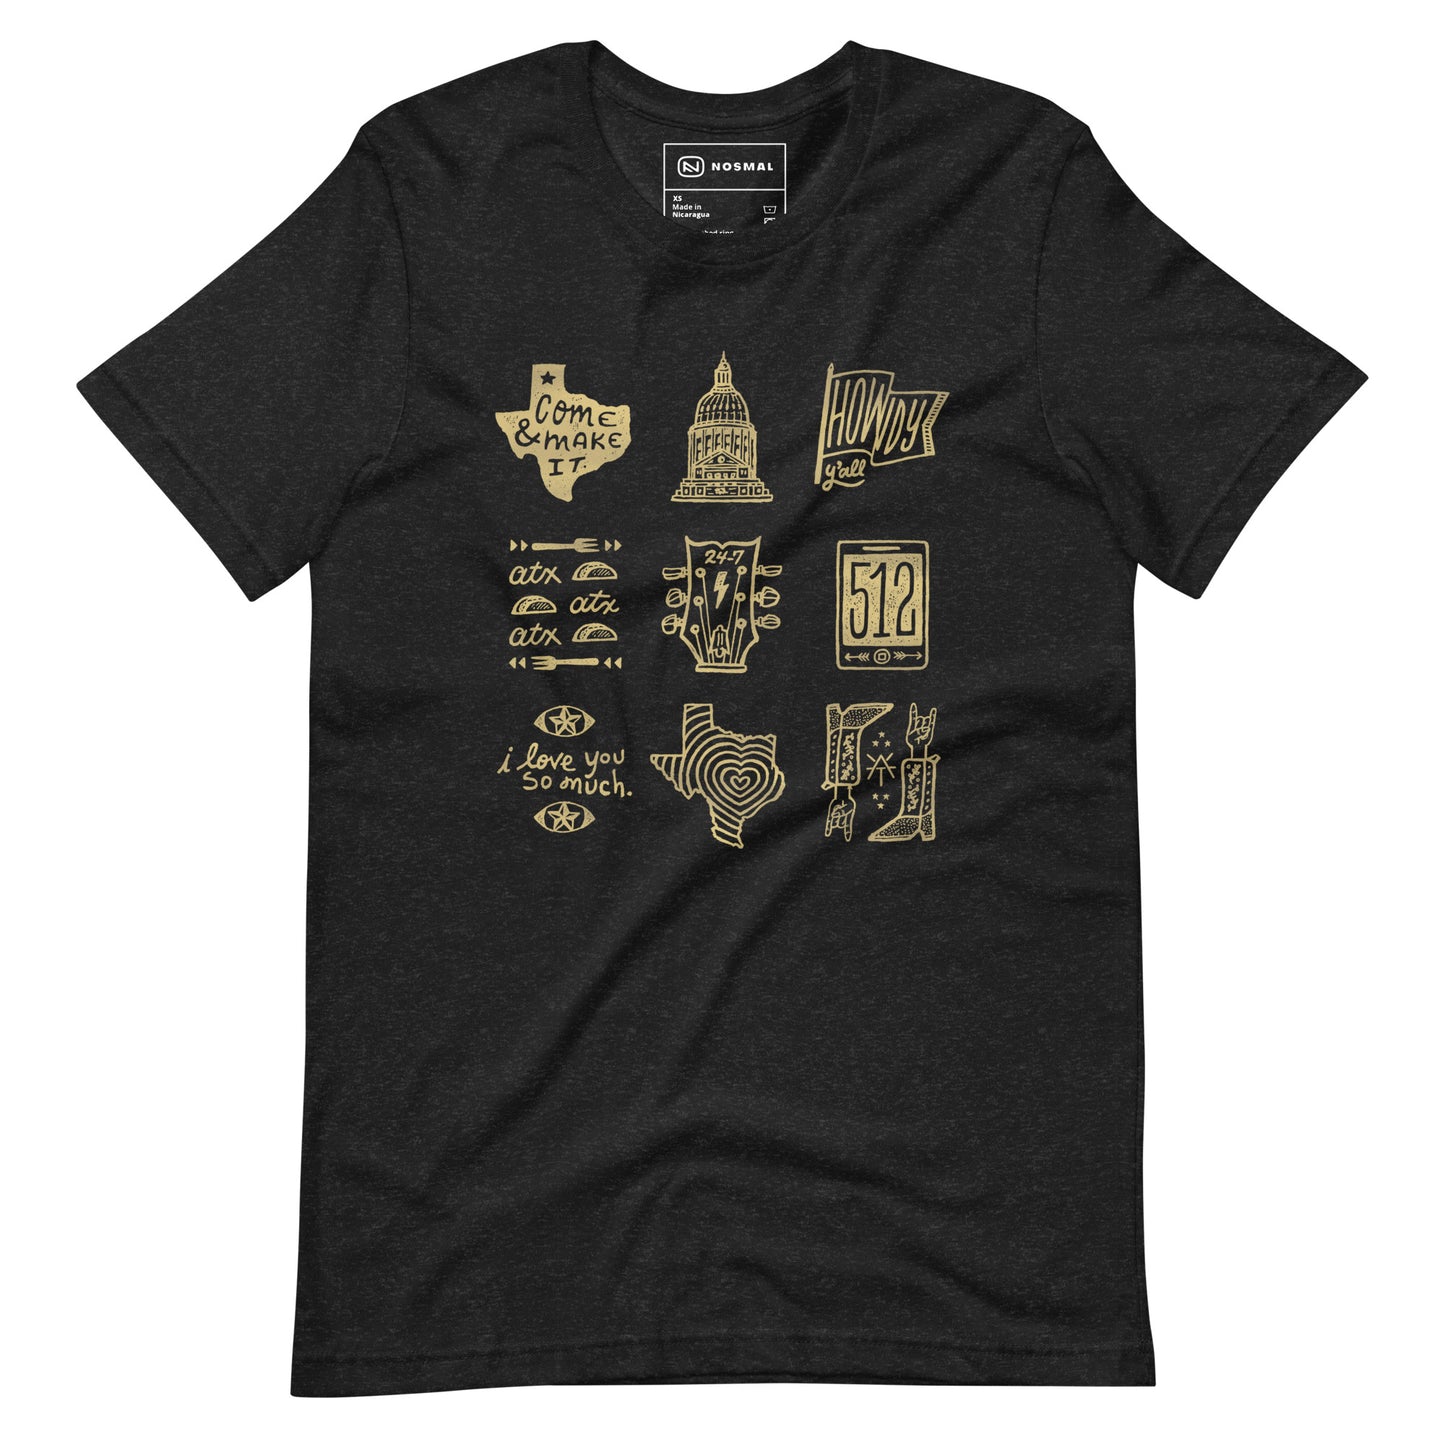 Straight on view of ode to 512 gold design on heather black unisex t-shirt.